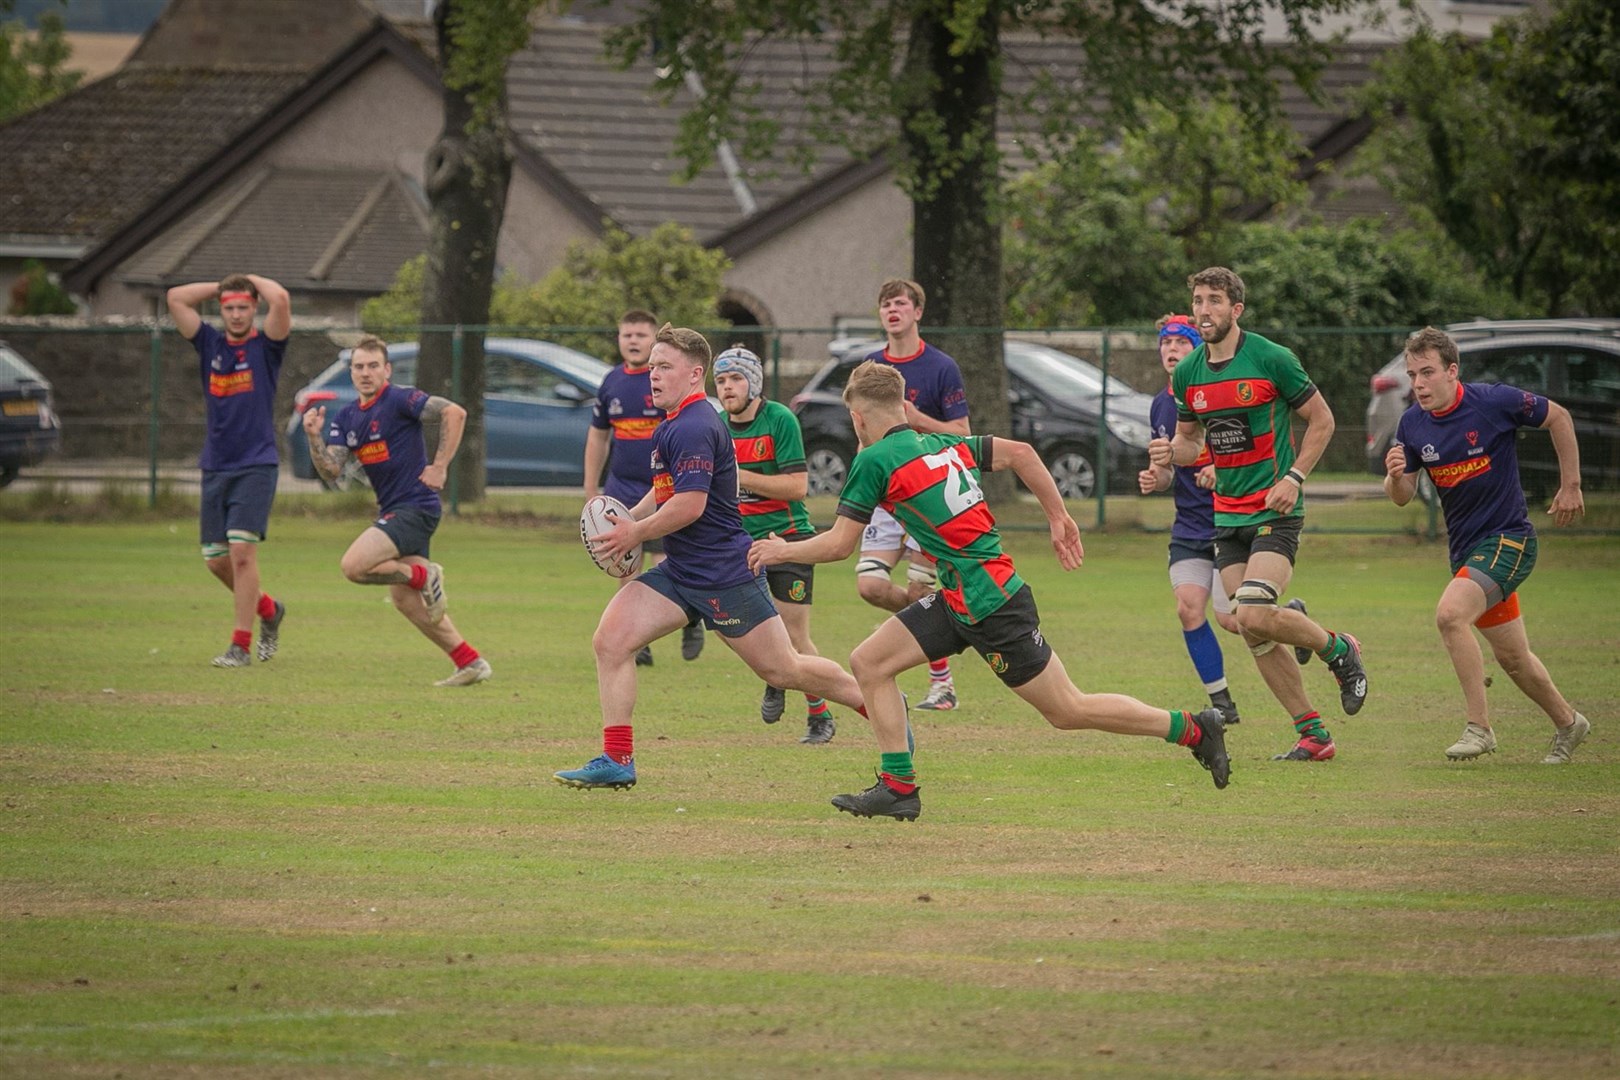 Ross Sutherland try and break forward in their opening match of the 2021/22 Caledonia North Two season against Highland 2nds. Picture: Peter Carson